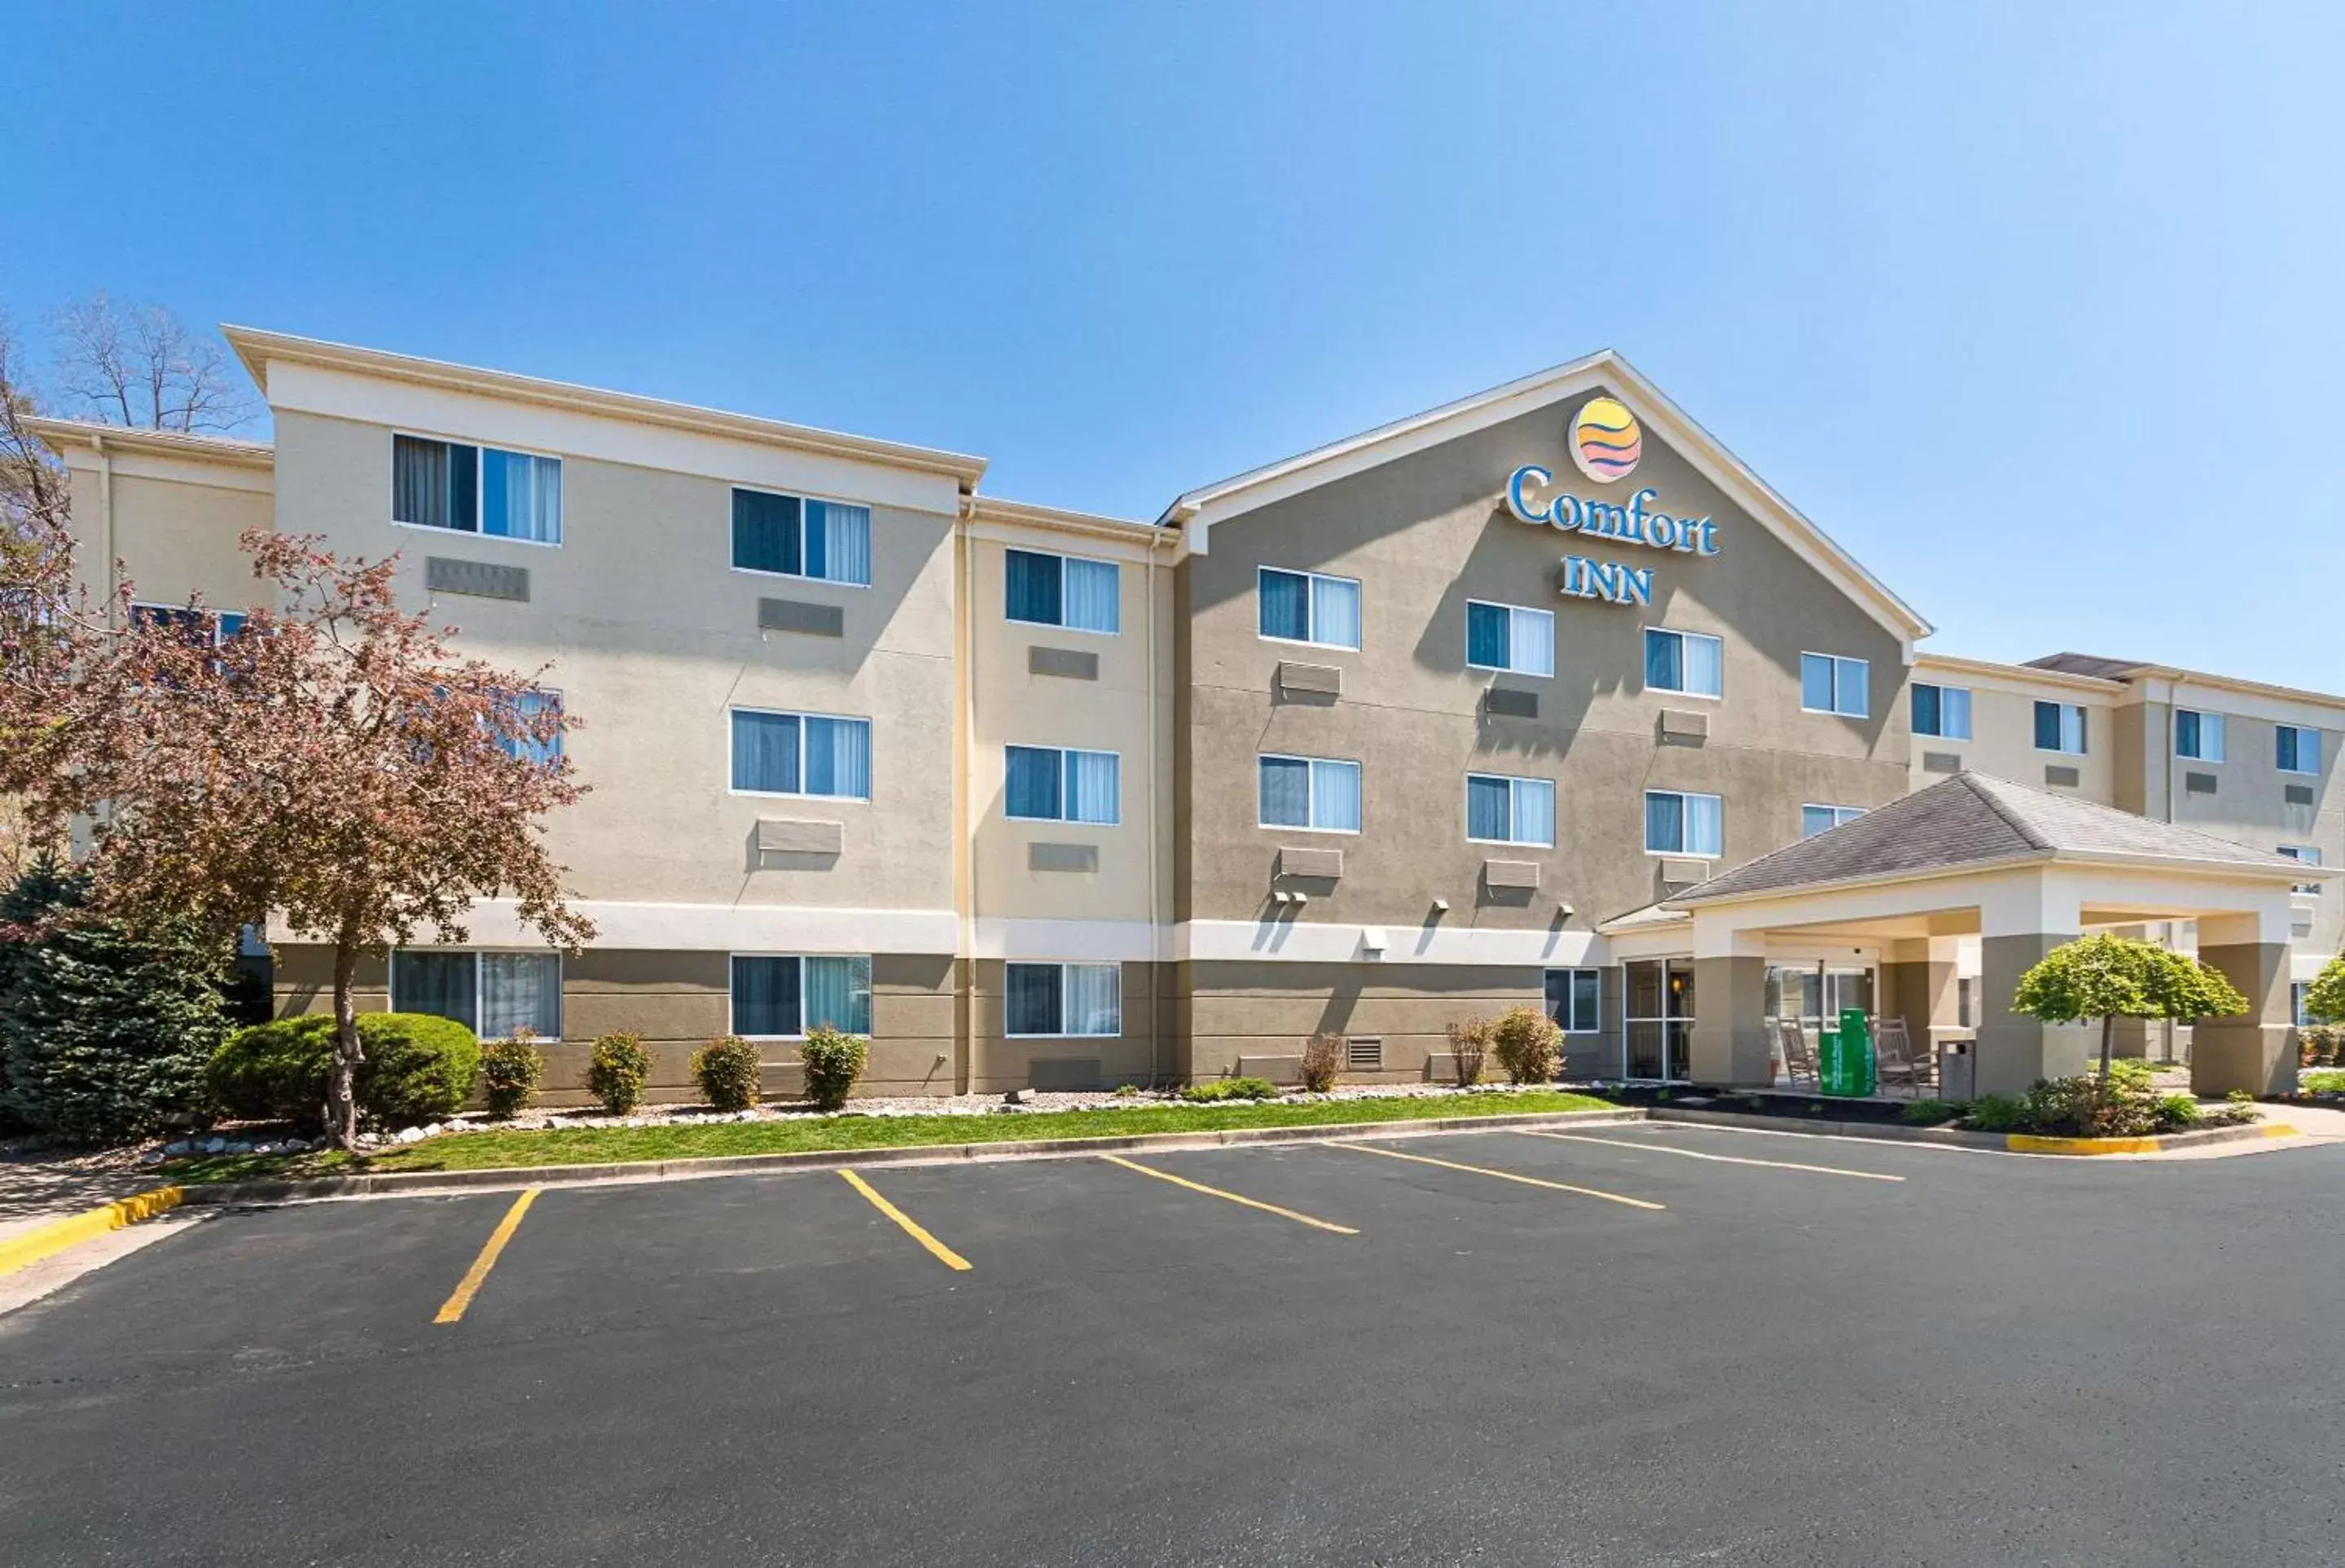 Property building in Comfort Inn Barboursville near Huntington Mall area